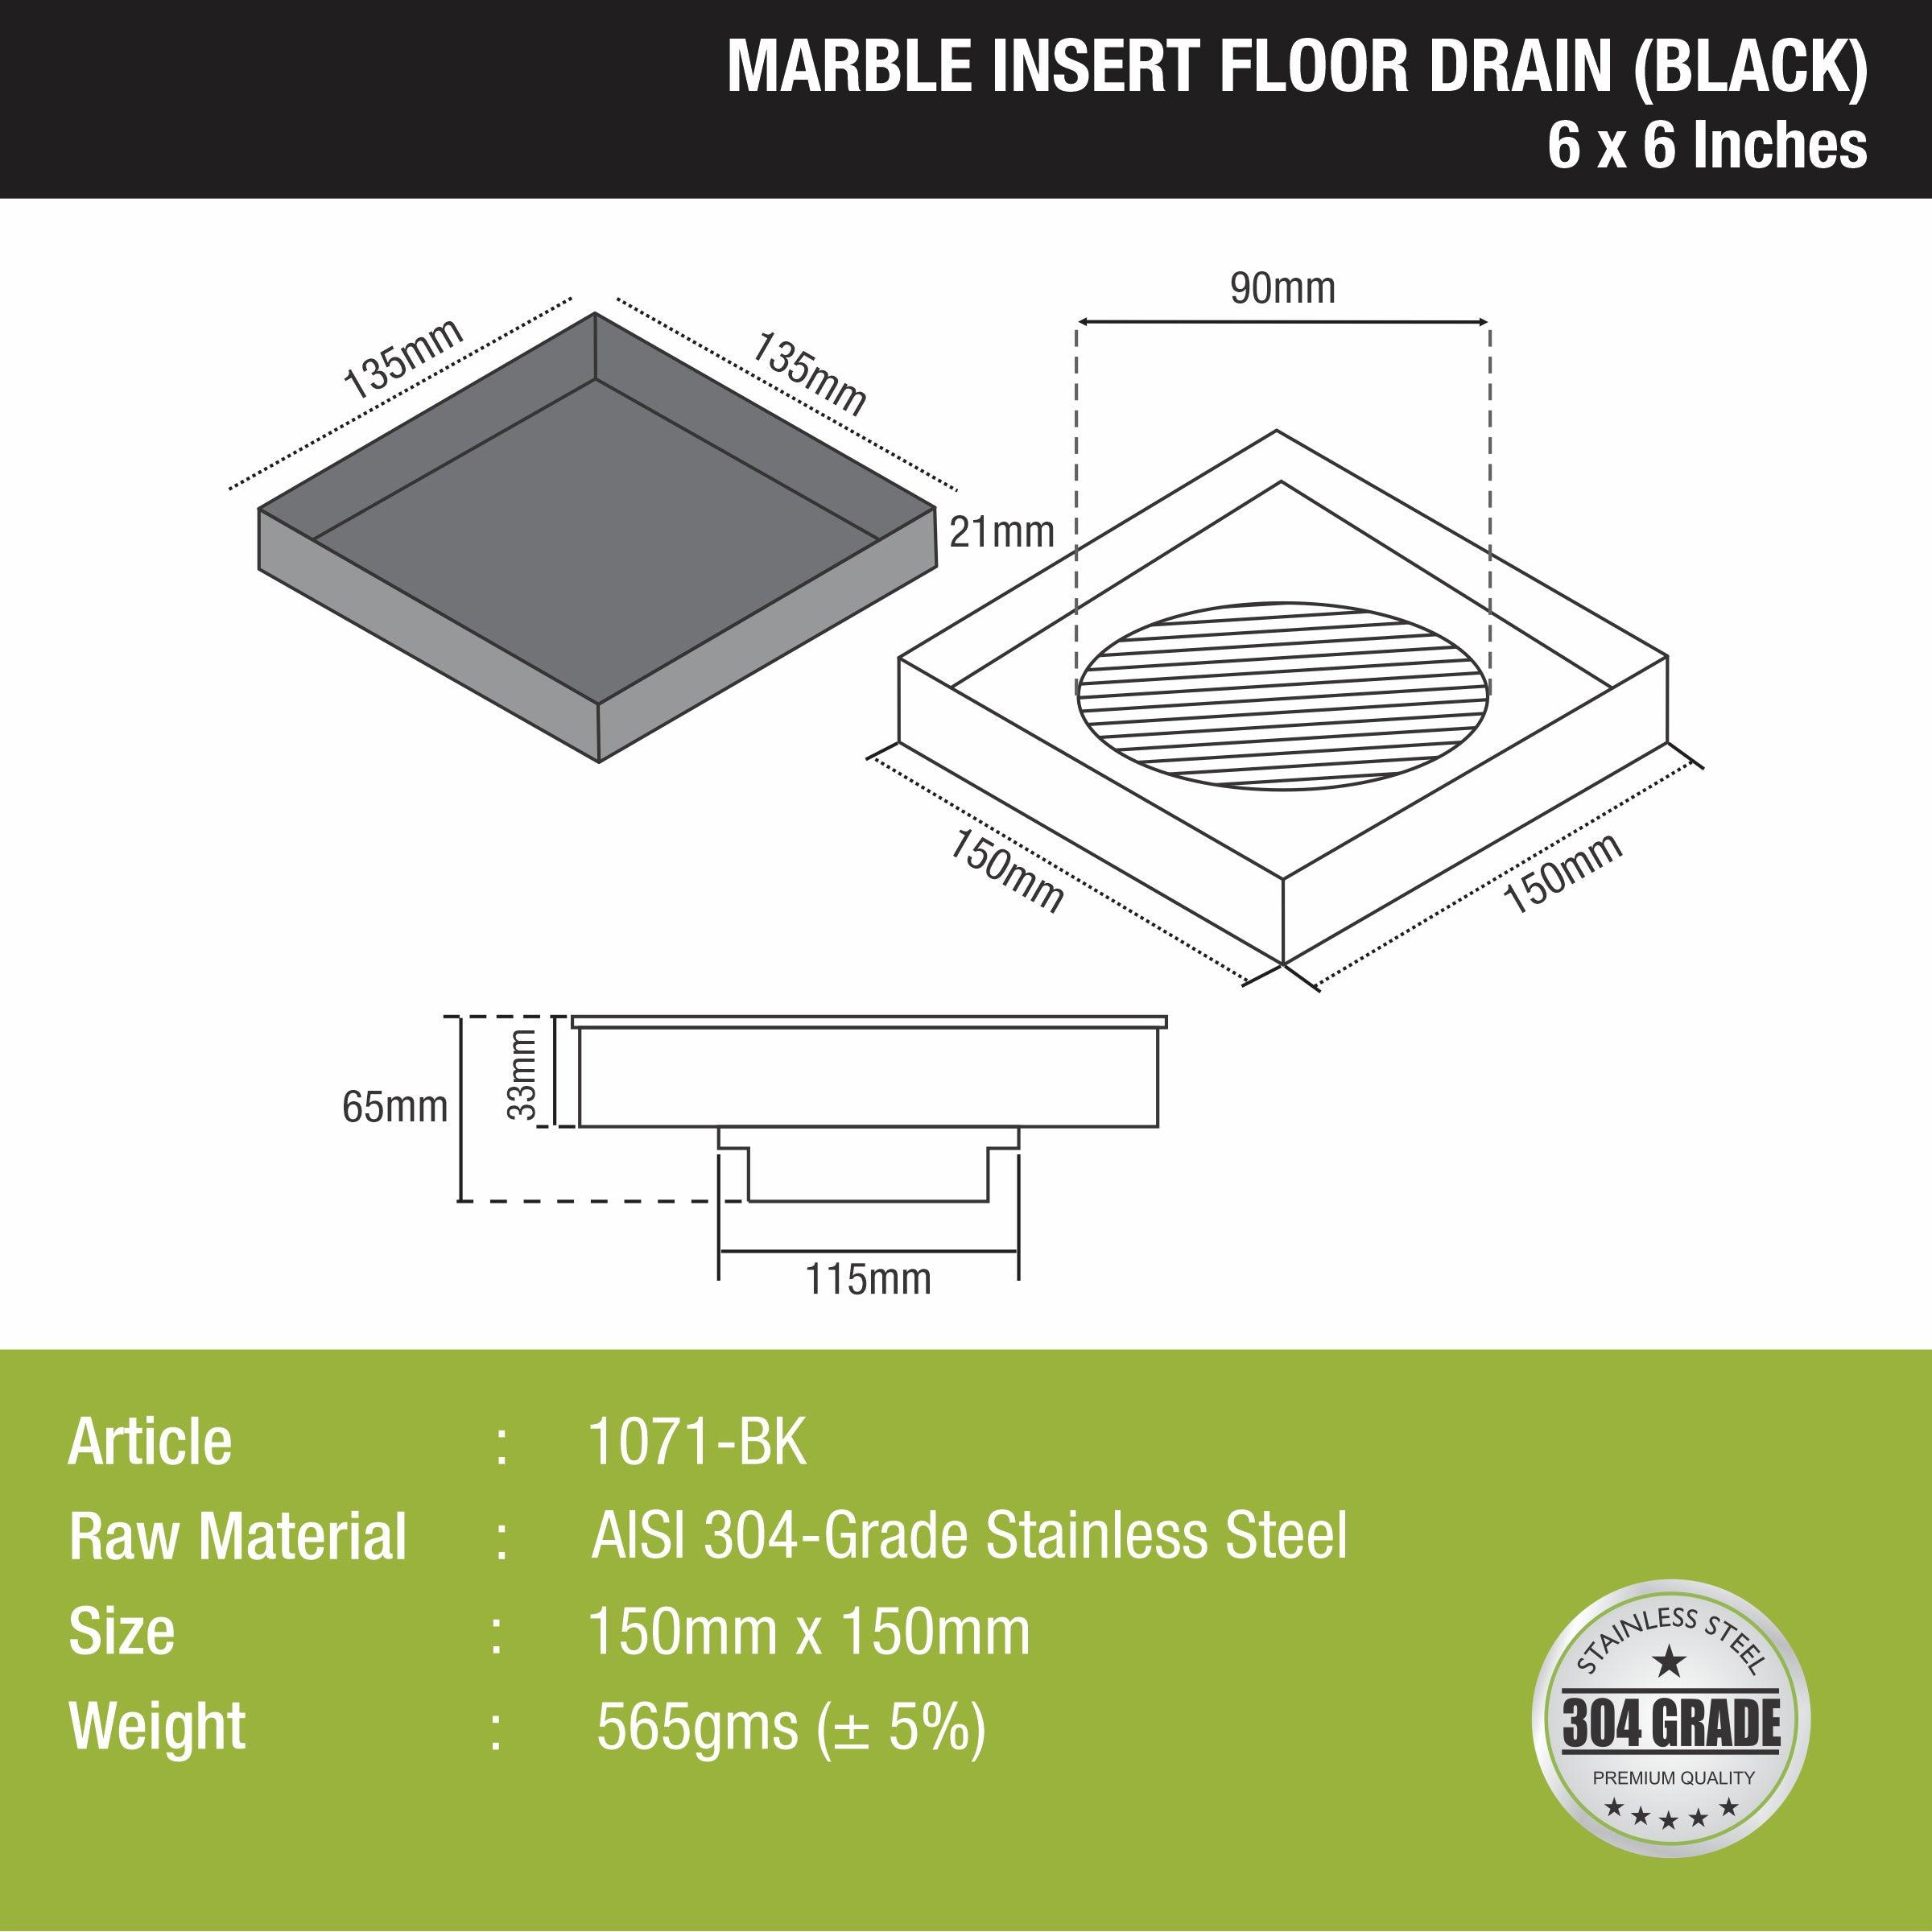 Marble Insert Square Floor Drain - Black (6 x 6 Inches) size and measurement